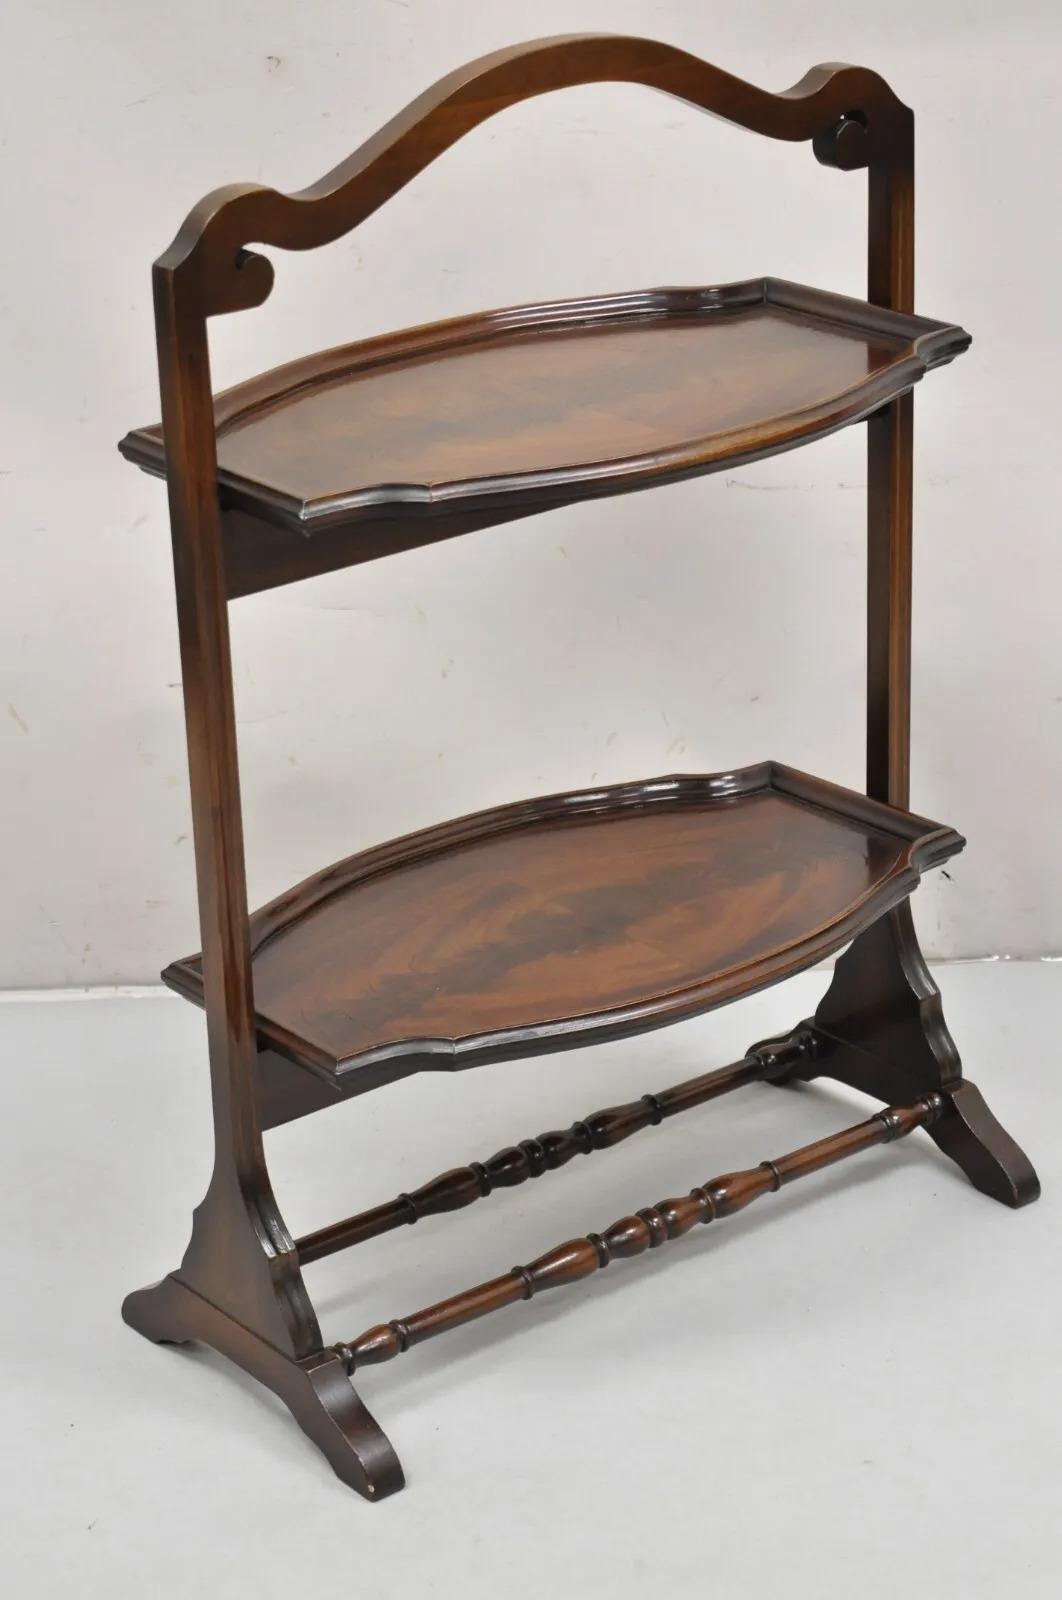 Vintage Regency Style Mahogany 2 Tier Folding Muffin Cake Stand Side Table. Circa Early 20th Century. Measurements: 32